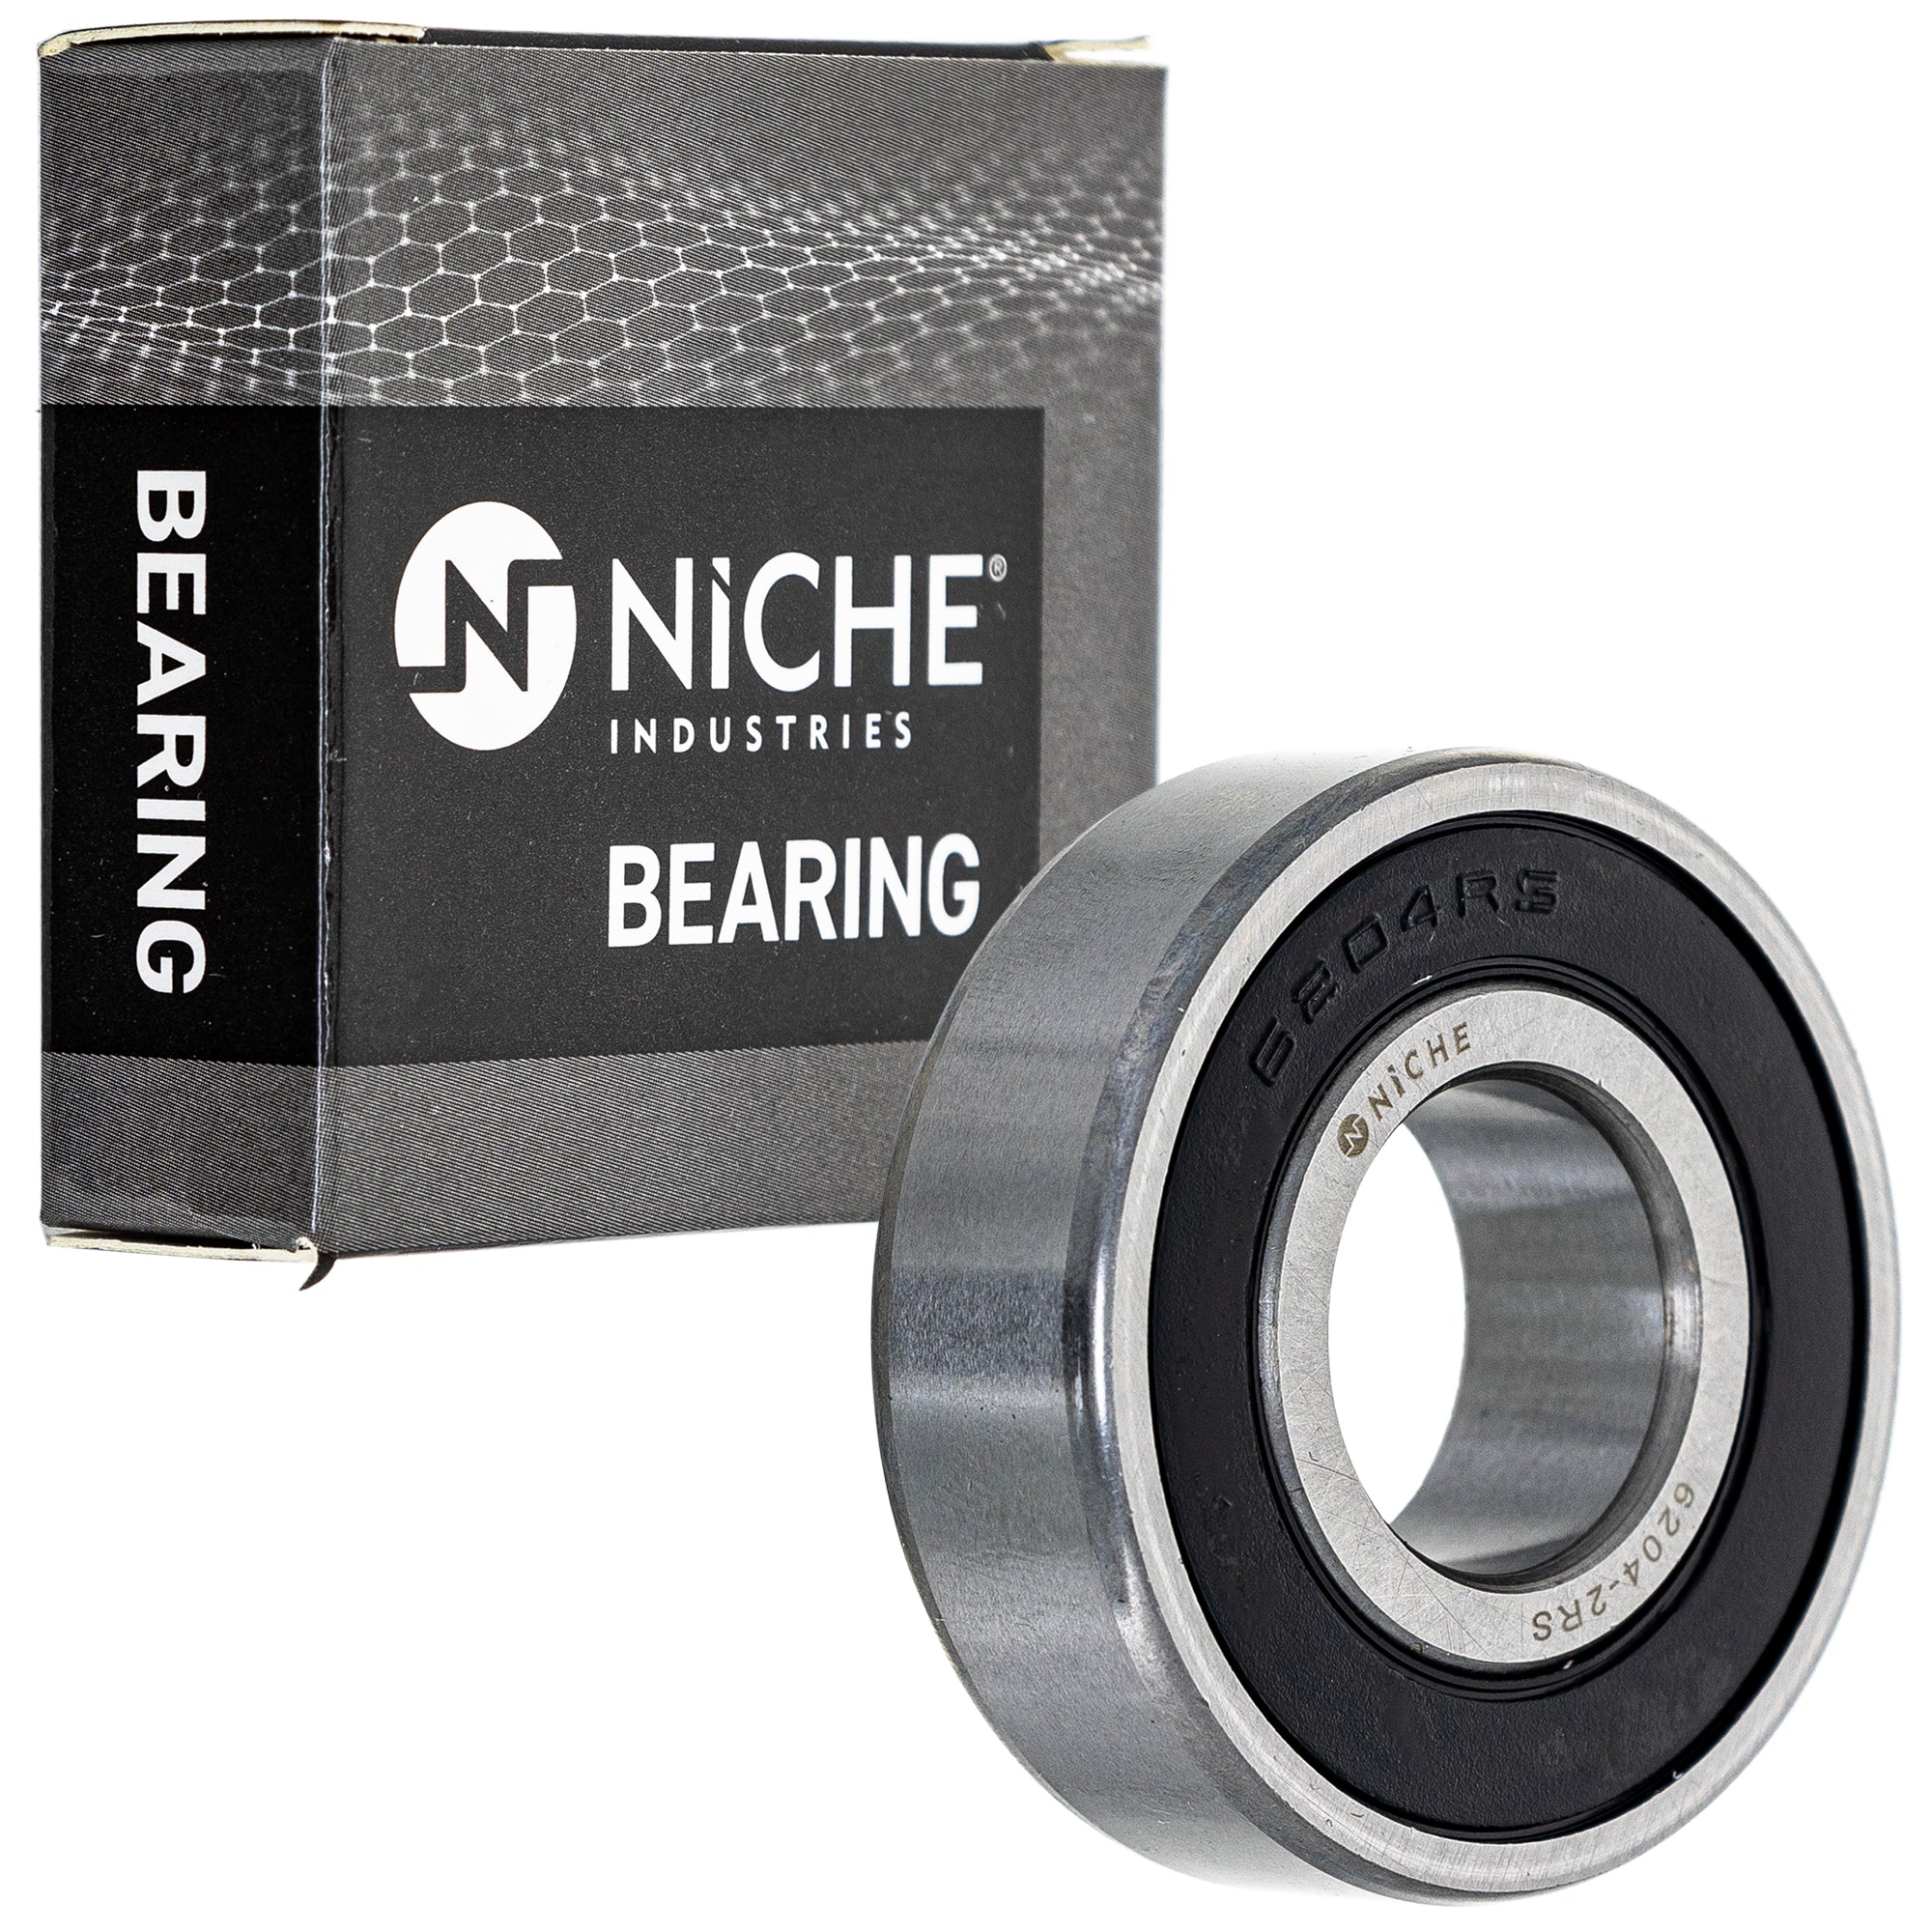 NICHE 519-CBB2229R Bearing & Seal Kit 2-Pack for zOTHER Snapper